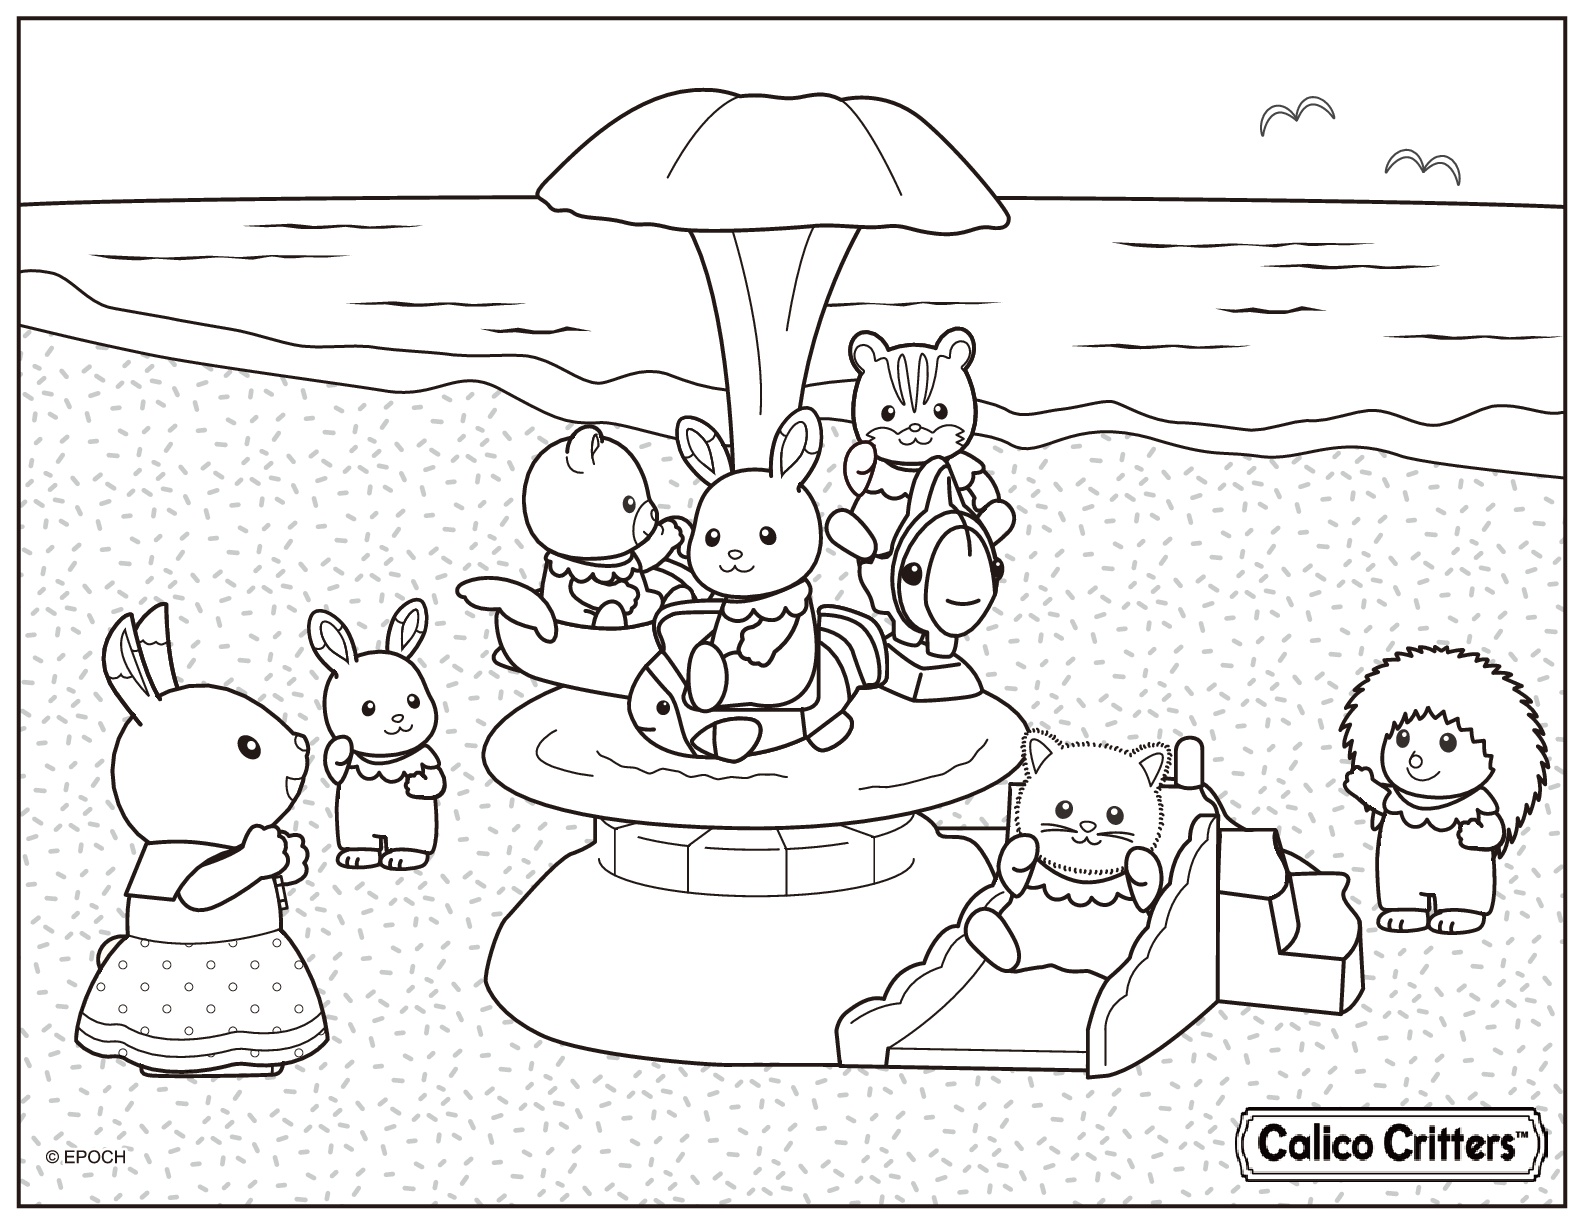 Calico Critters In The Beach For Vacation